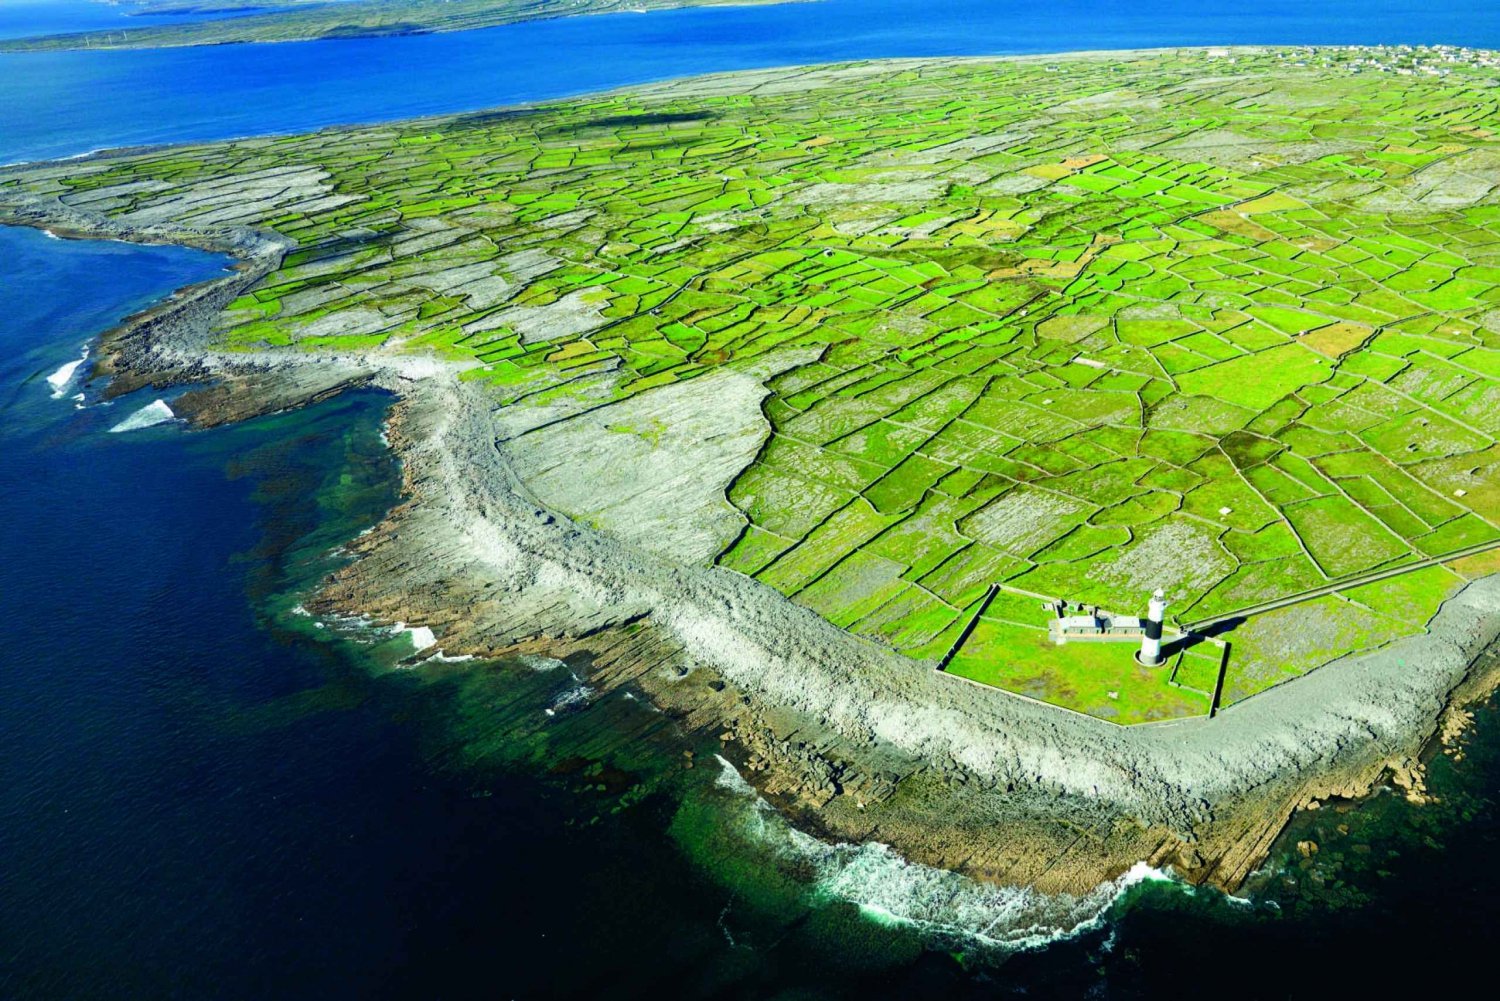 From Galway: Aran Islands Day Trip & Cliffs of Moher Cruise